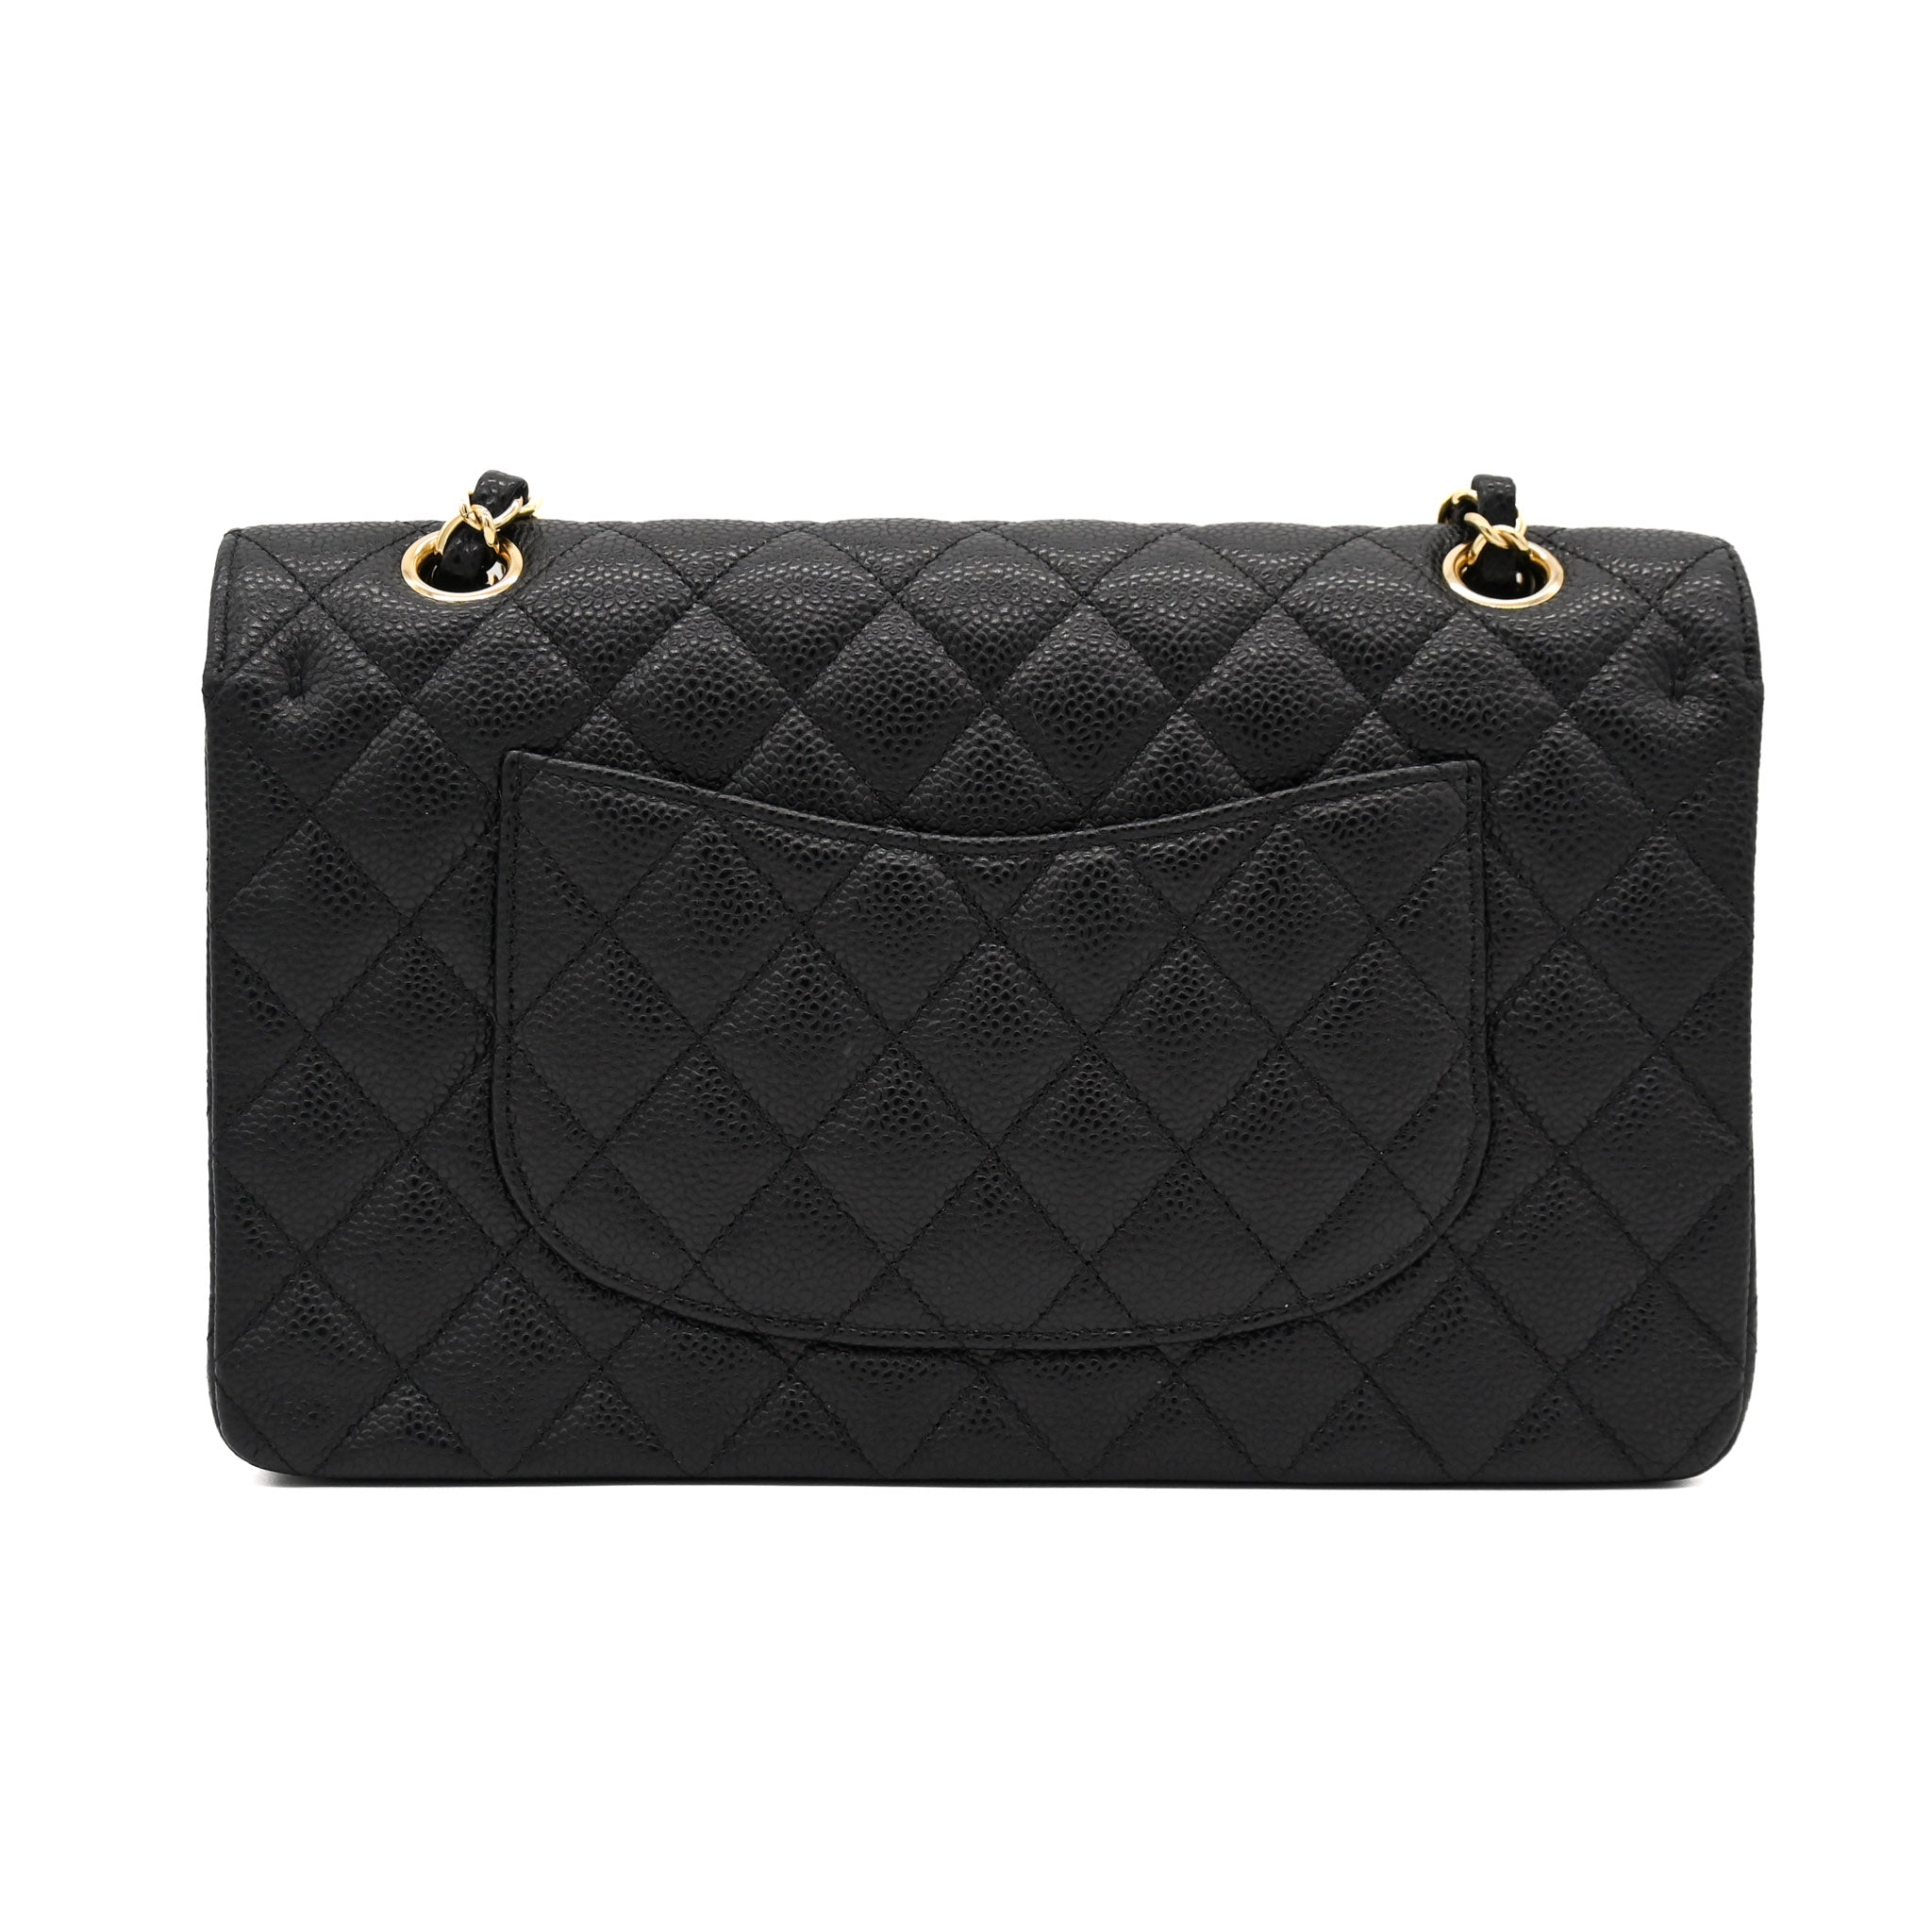 Chanel Classic Double Flap Bag in Caviar Medium Black with Gold Hardware - Vault 55 | Authentic Preowned Luxury